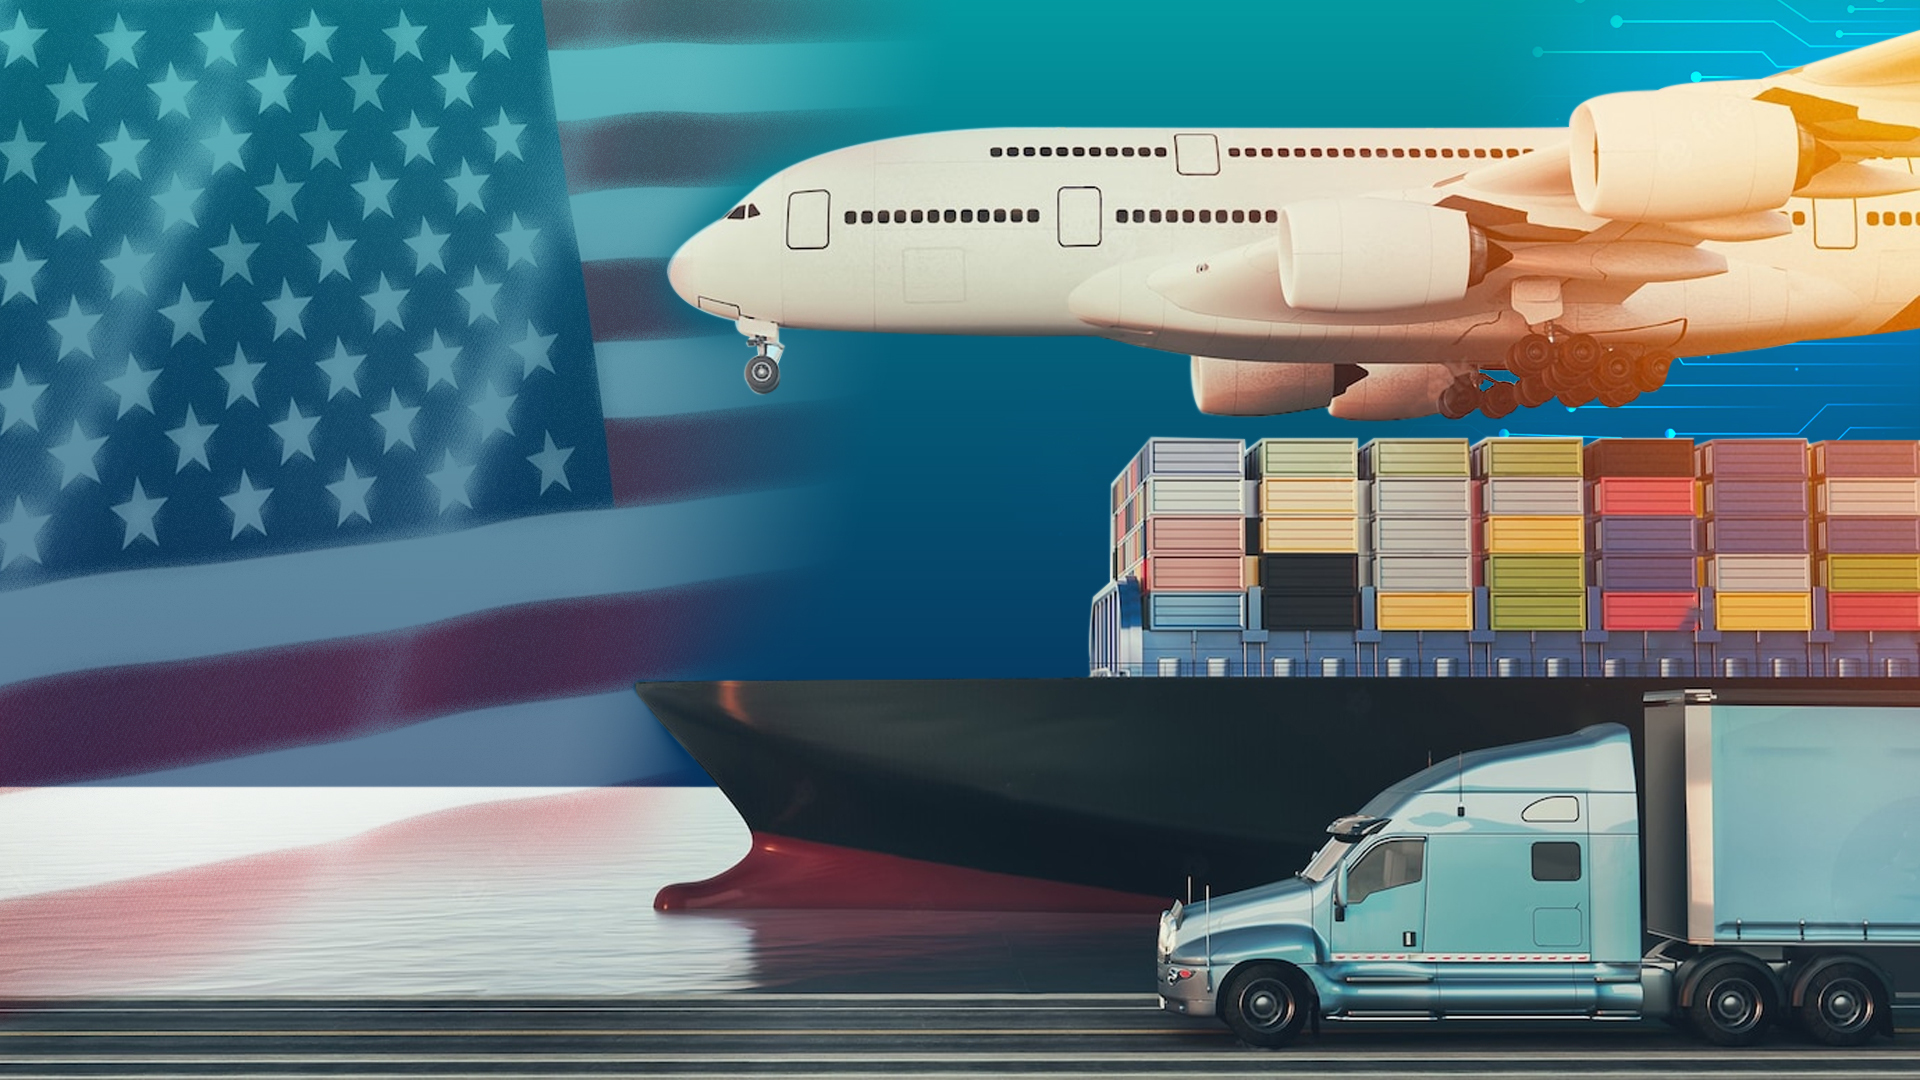 Data Automation will assist in Department of Transportation Strategic Plans in the US